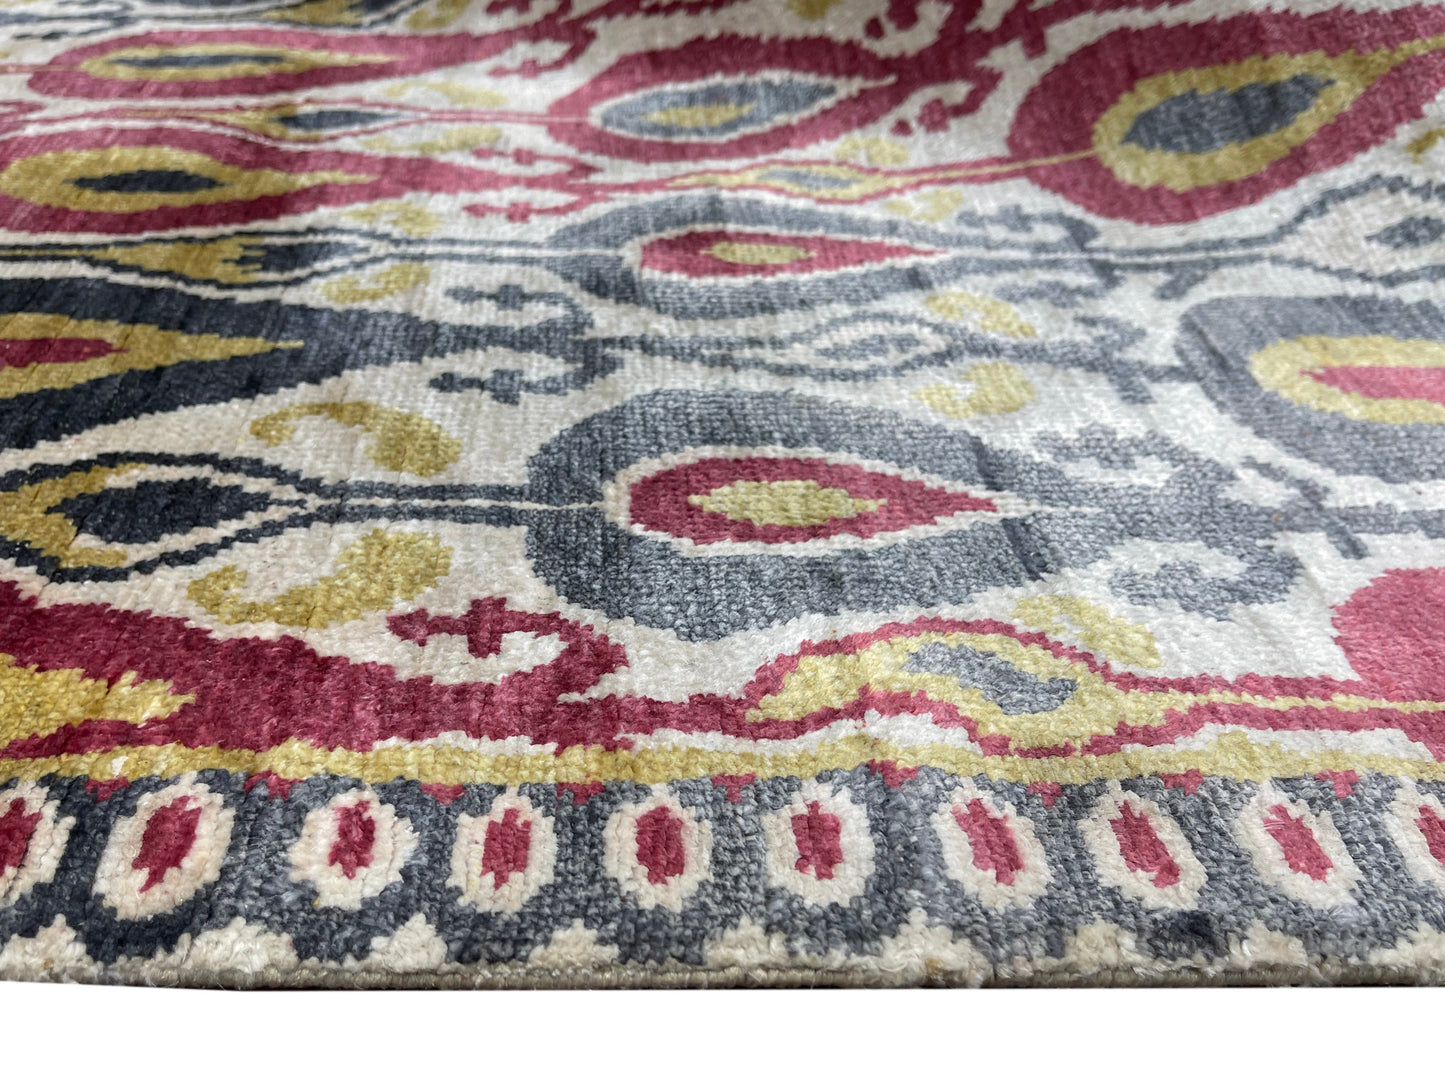 Get trendy with Red and Ivory Pure Silk Transitional Handknotted Area Rug 6x9ft 183X275Cms - Transitional Rugs available at Jaipur Oriental Rugs. Grab yours for $3760.00 today!